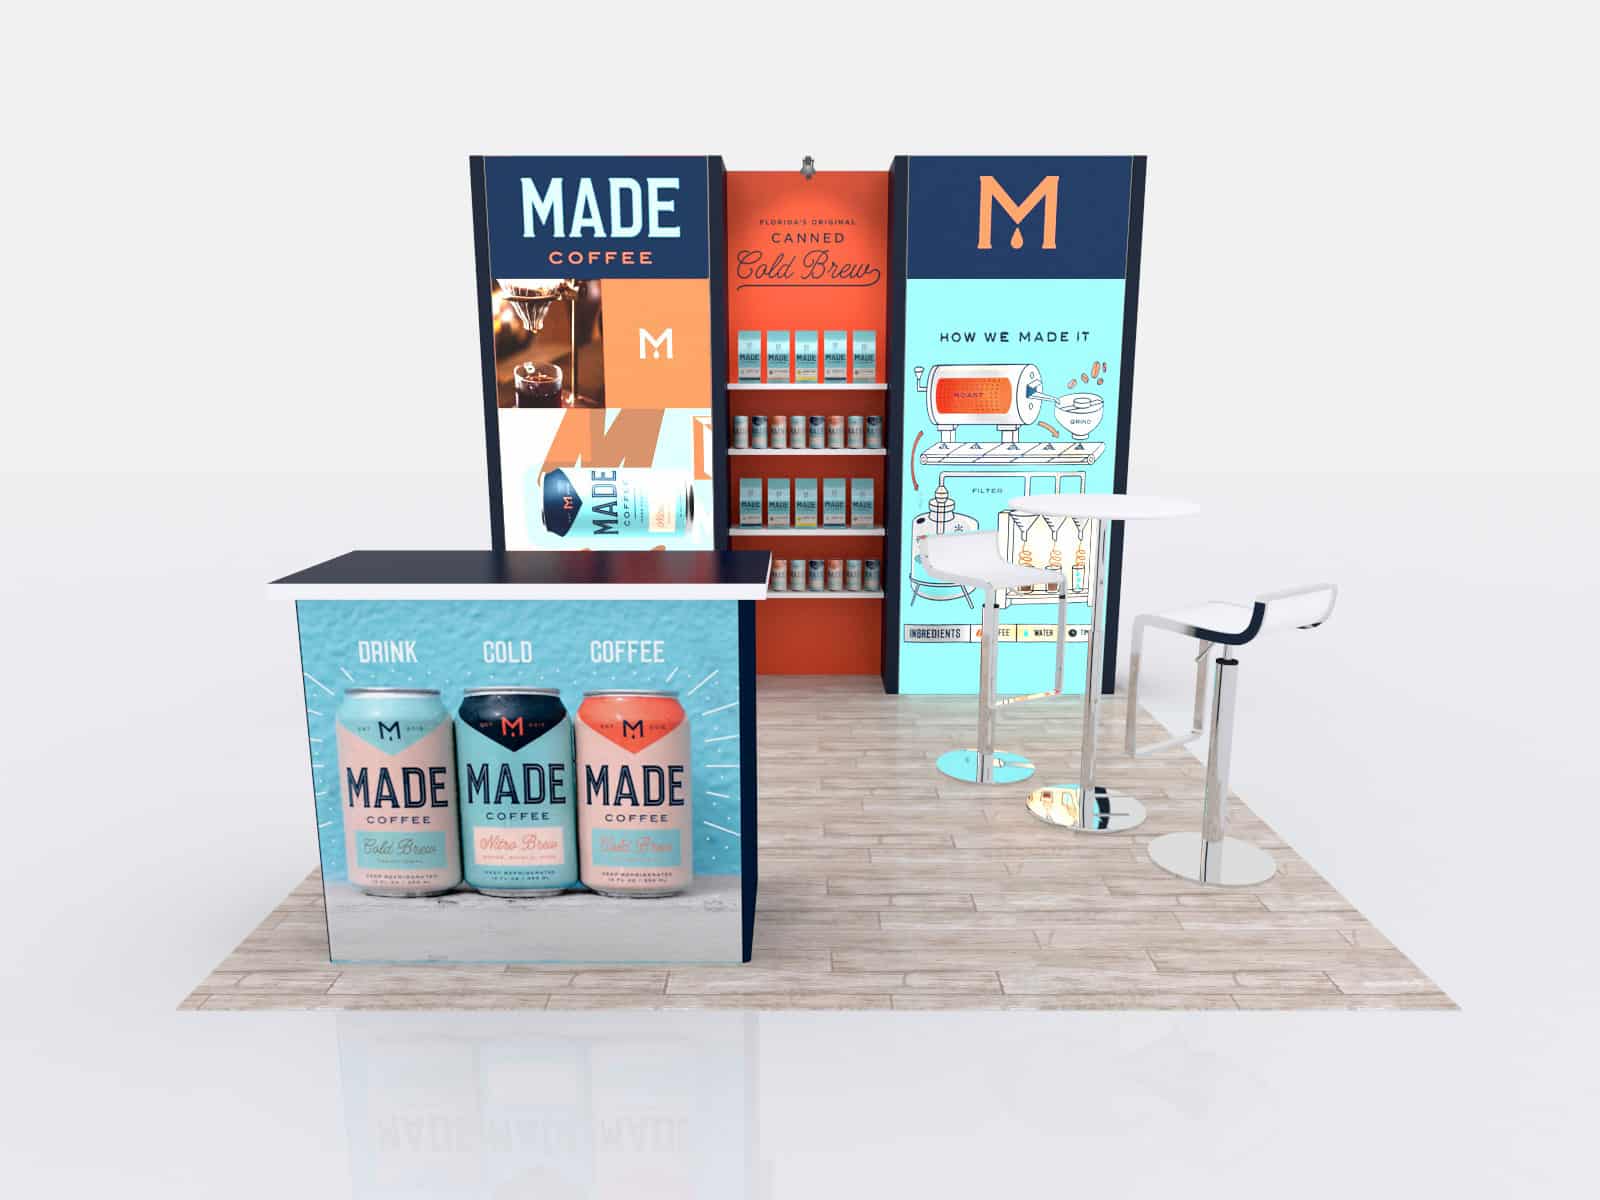 Trade Show Booth Rental Las Vegas: Your Guide to Hassle-Free Exhibiting 3